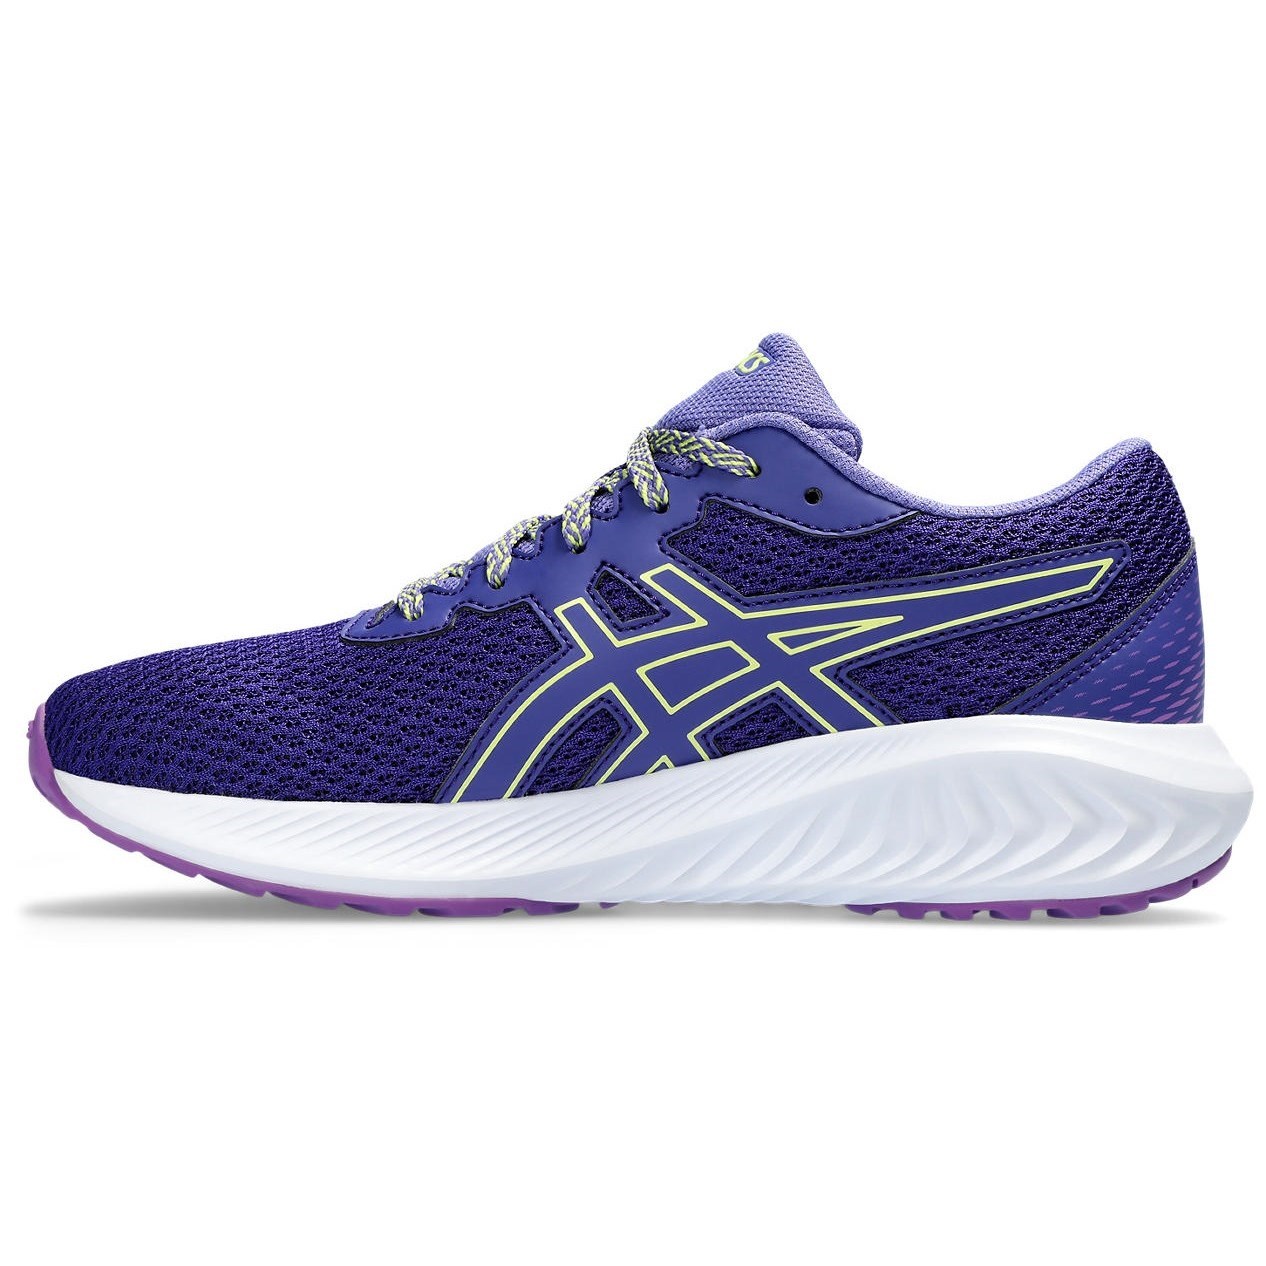 Asics Gel Excite 10 GS - Kids Running Shoes - Eggplant/Glow Yellow ...